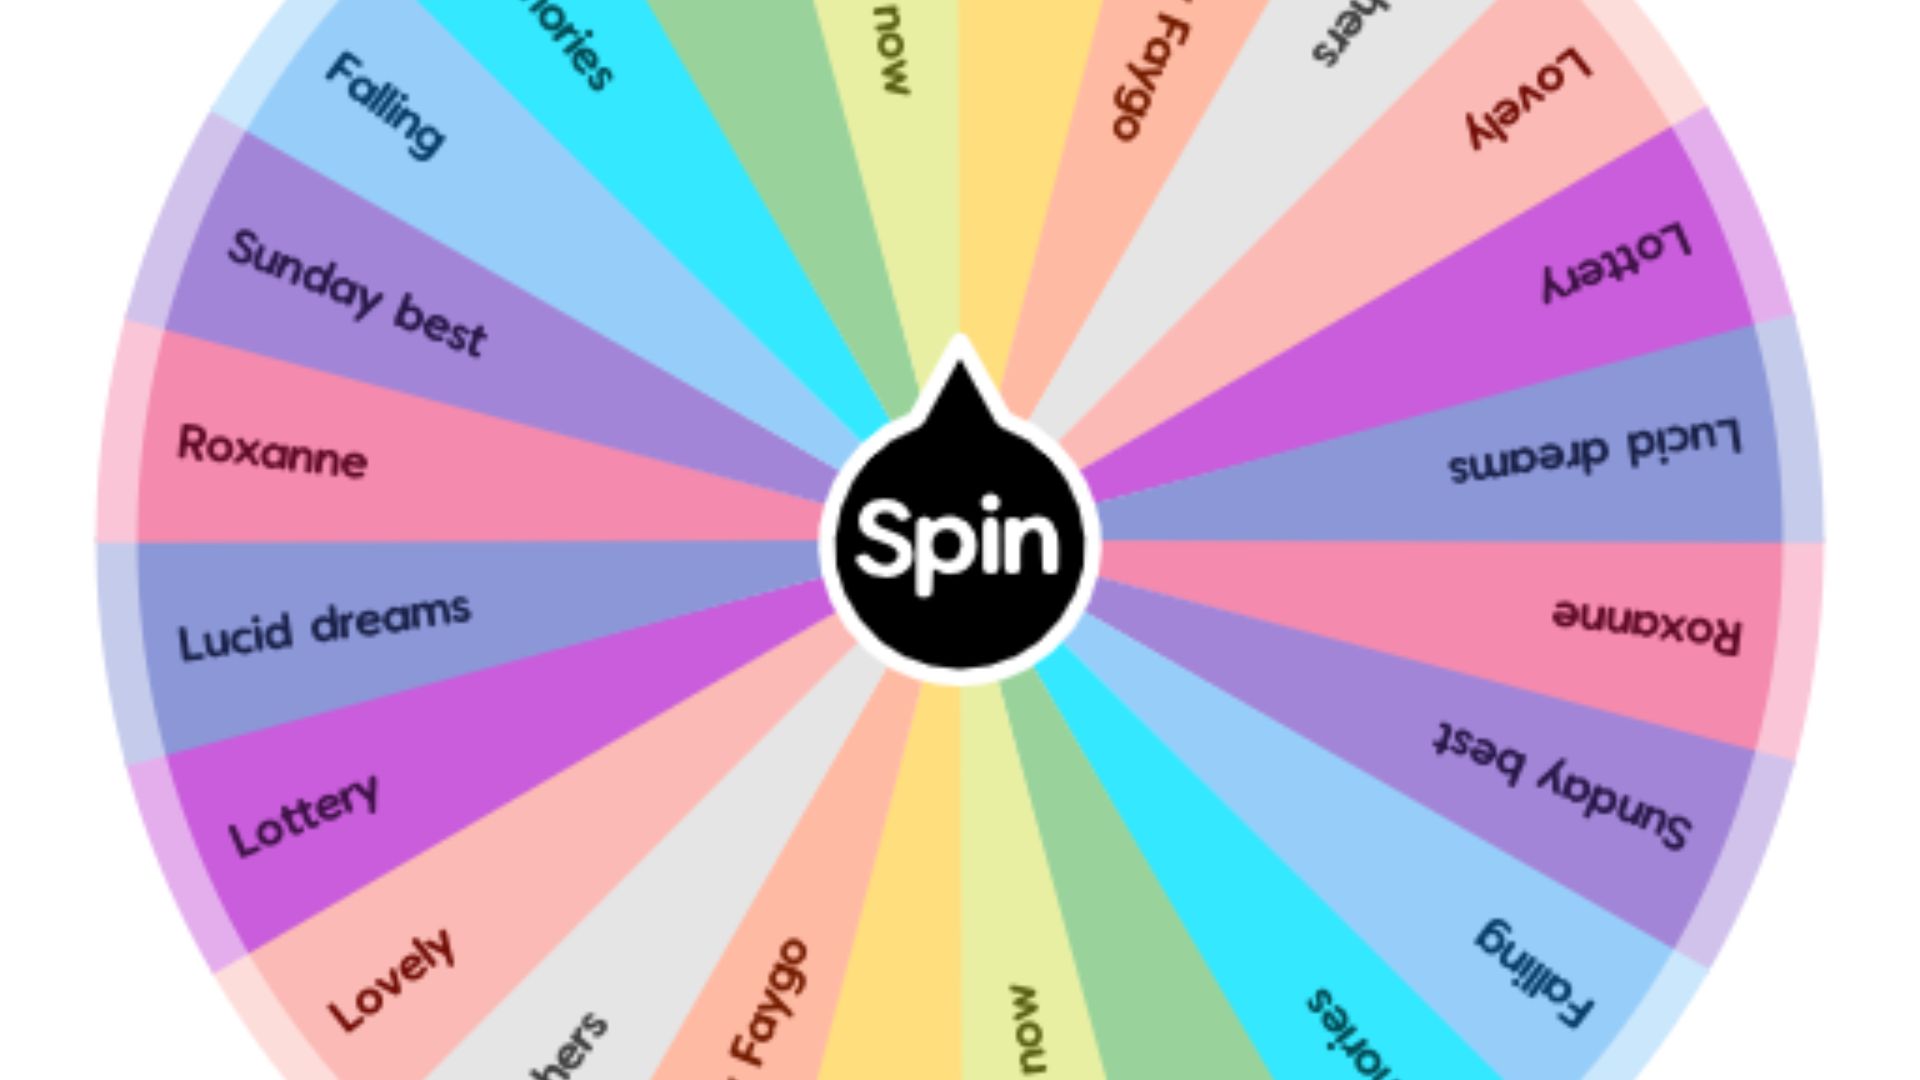 A Spin Wheel for Music Festivals